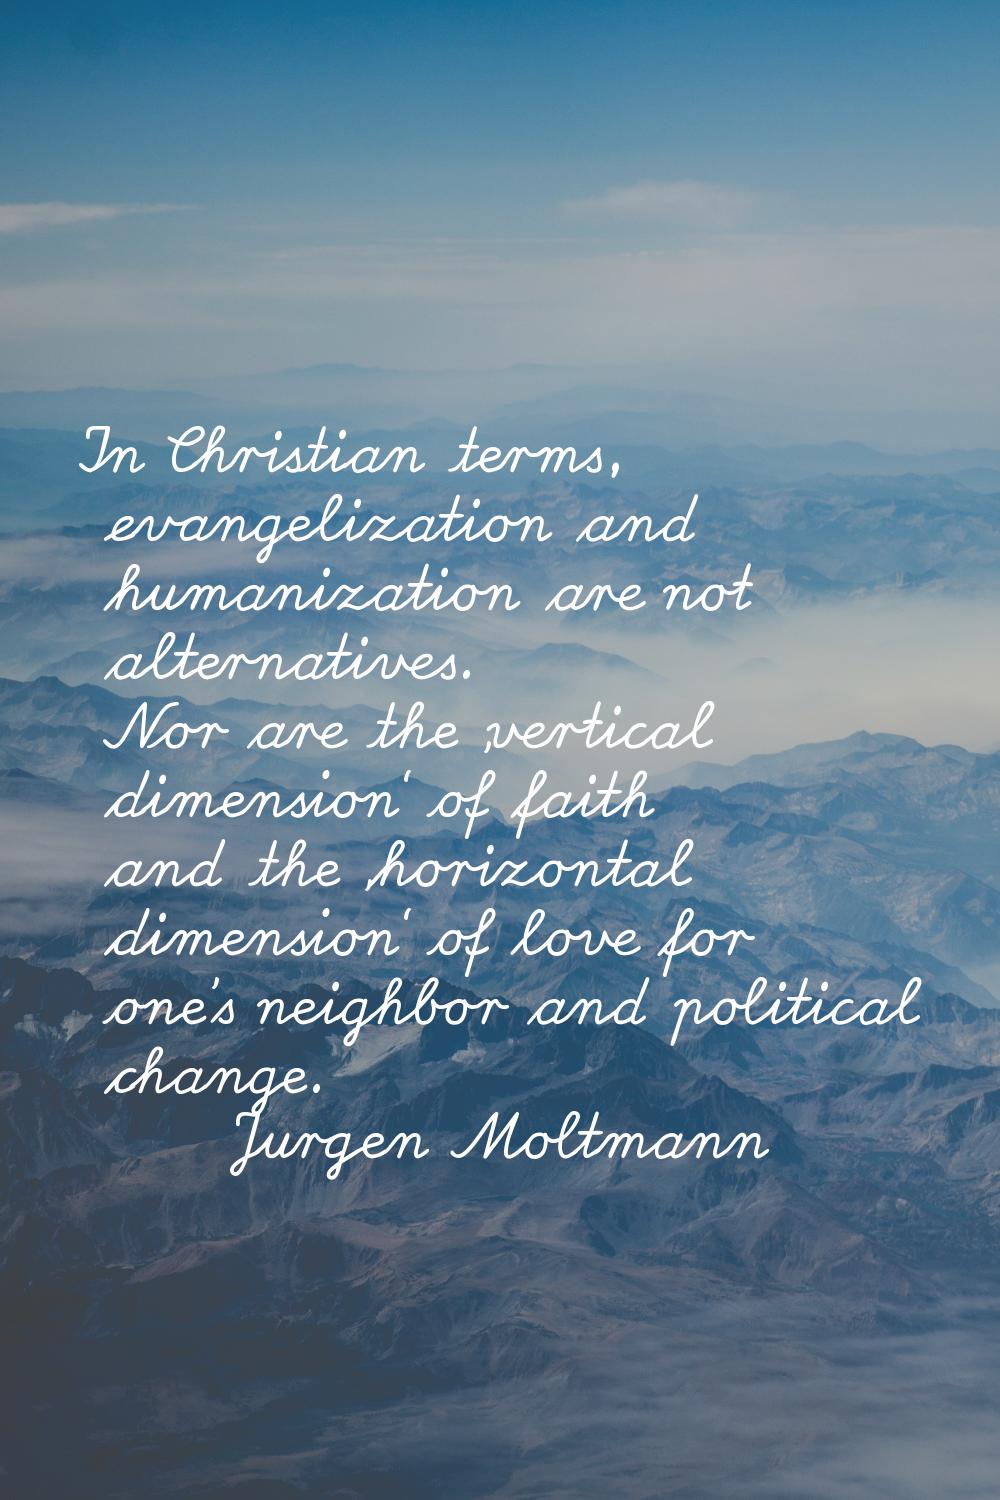 In Christian terms, evangelization and humanization are not alternatives. Nor are the 'vertical dim